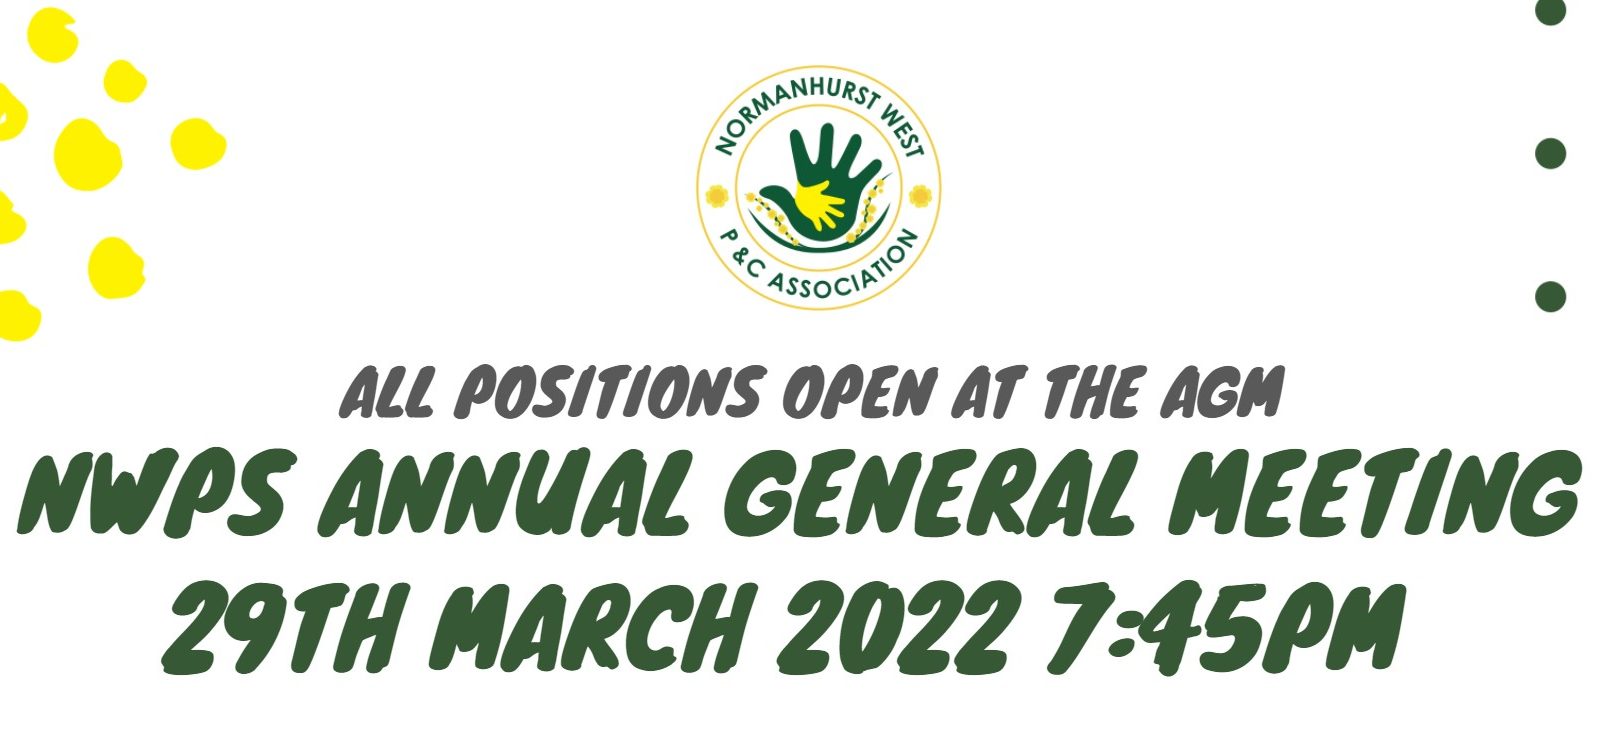 NWPS AGM 2022 – 29th March 7:45pm at school